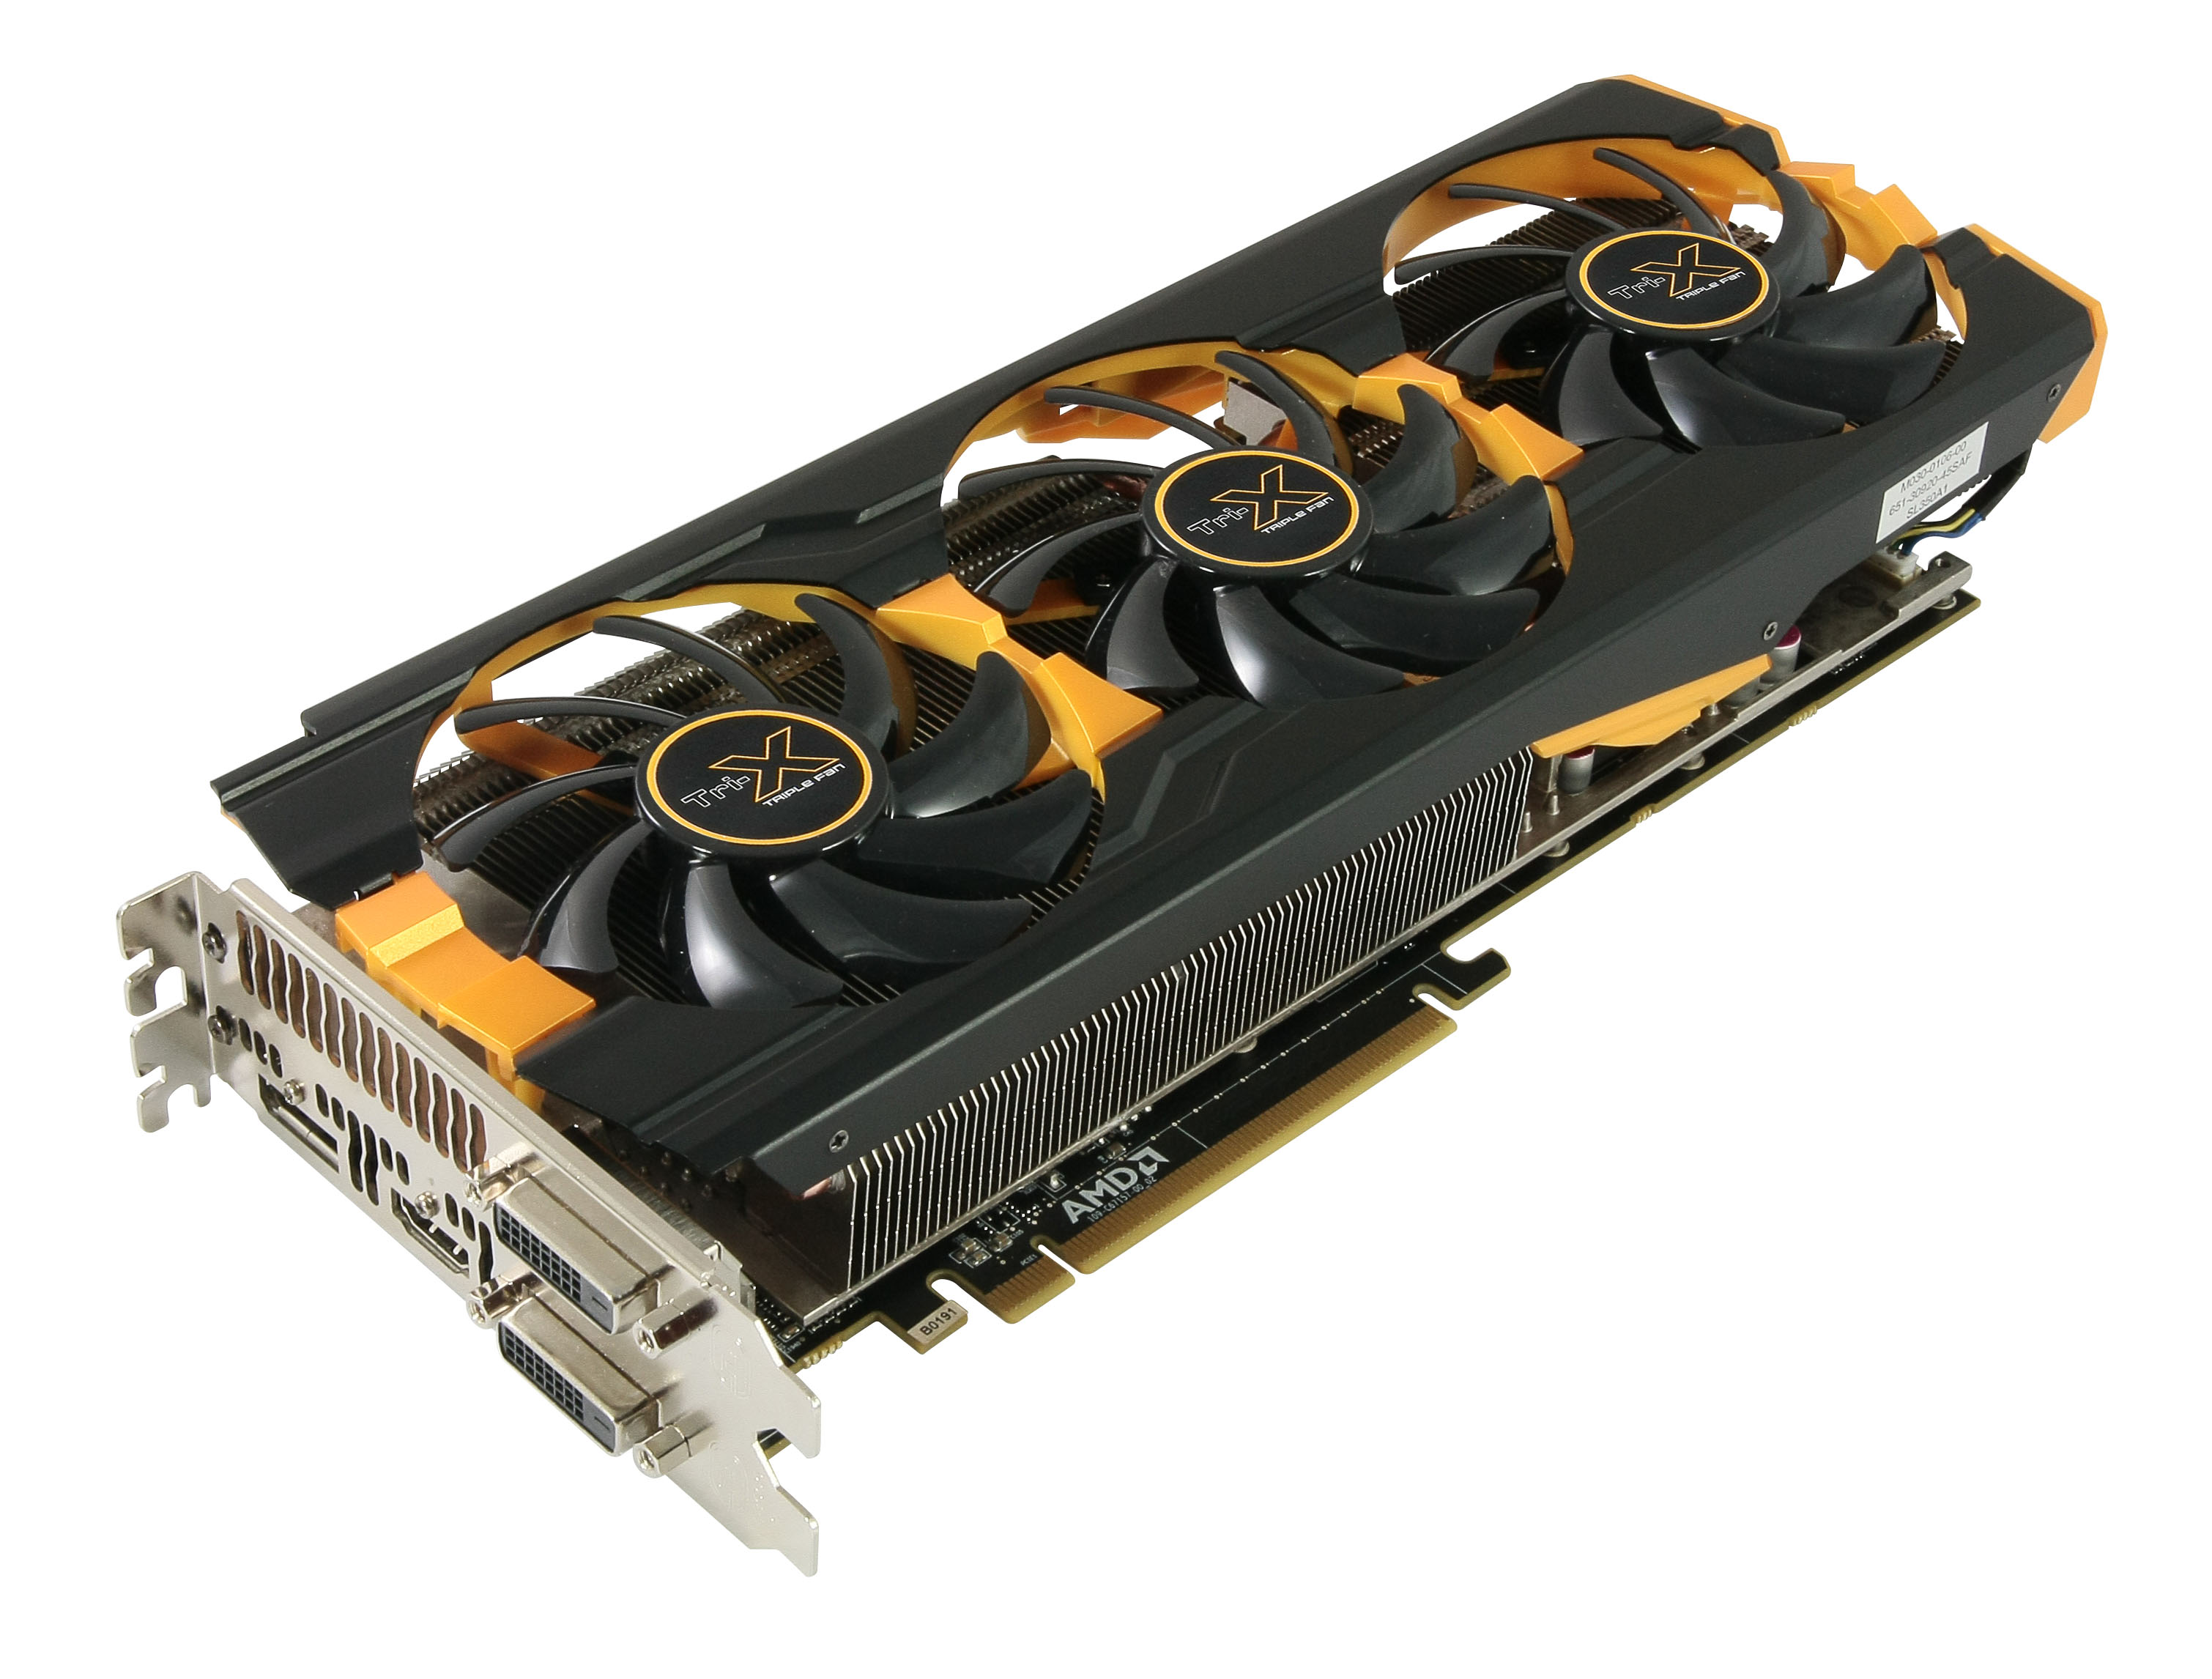 Sapphire Radeon R9 290 Tri X Oc Review Our First Custom Cooled 290